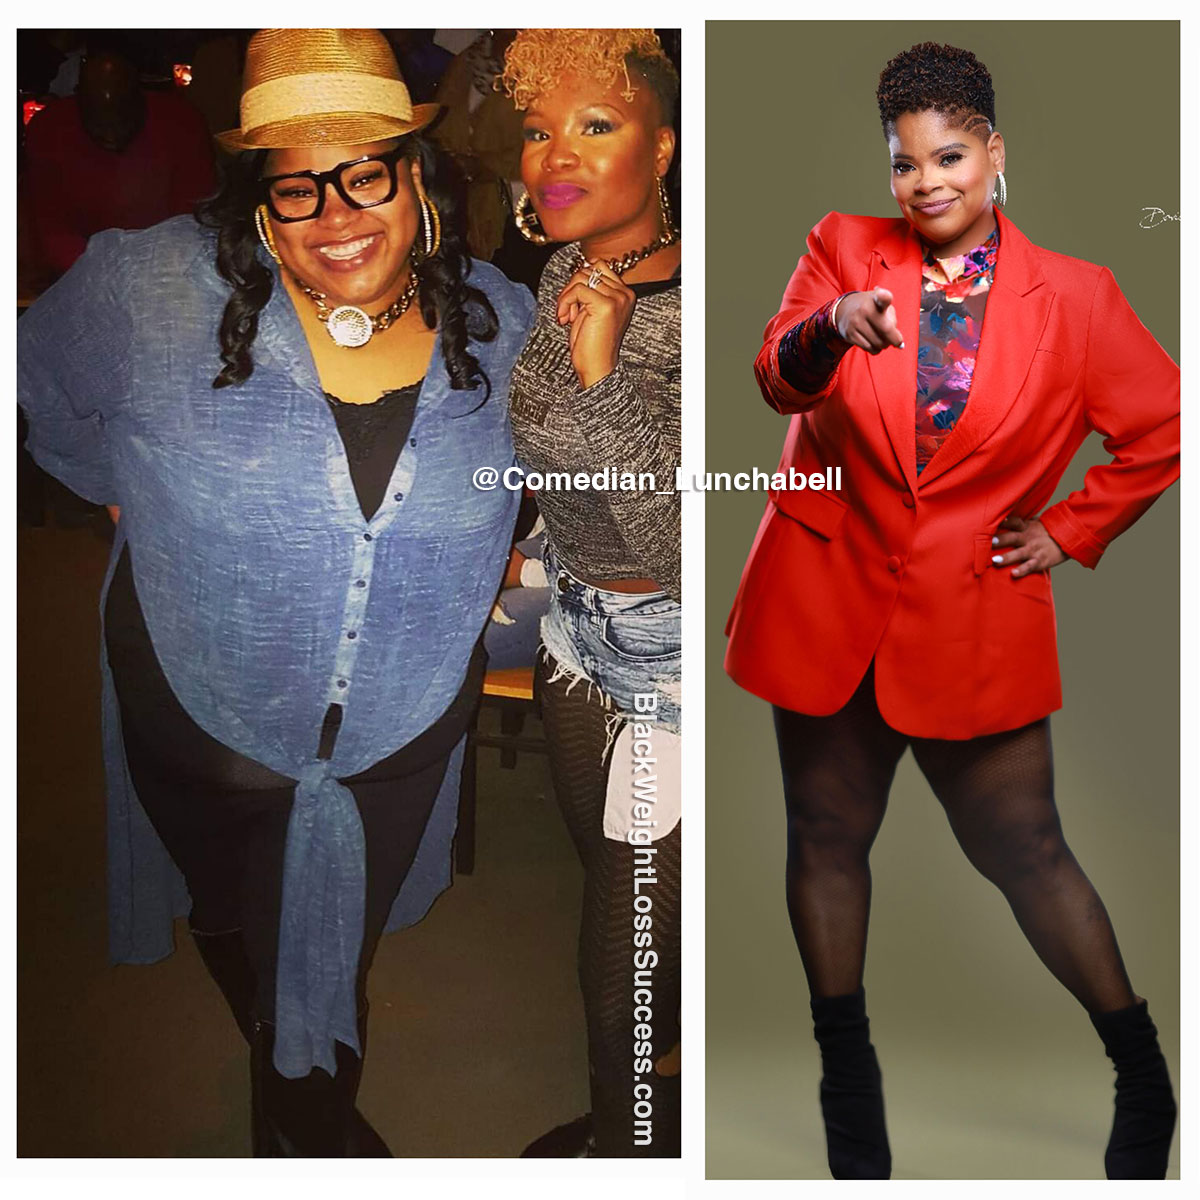 Dominique lost 86 pounds | Black Weight Loss Success